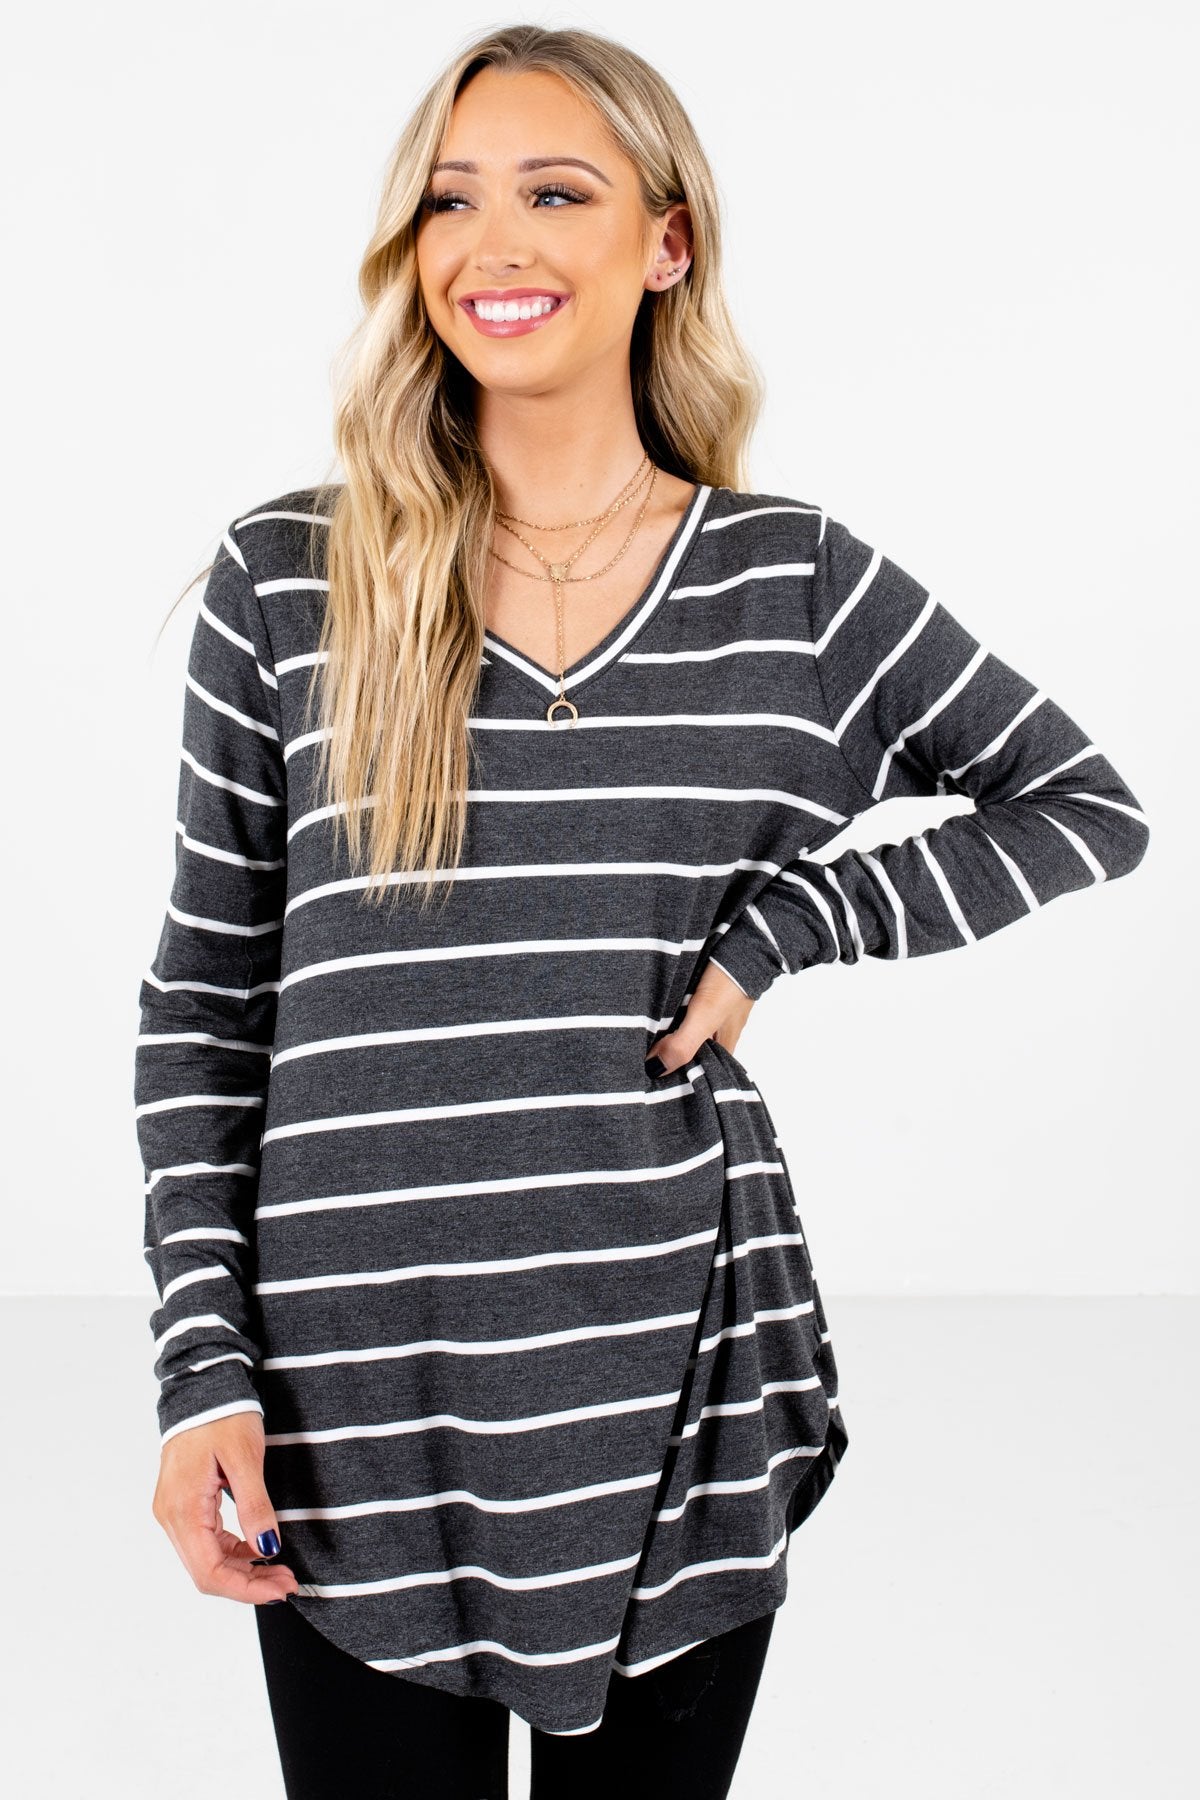 Charcoal Gray and White Striped Boutique Tops for Women